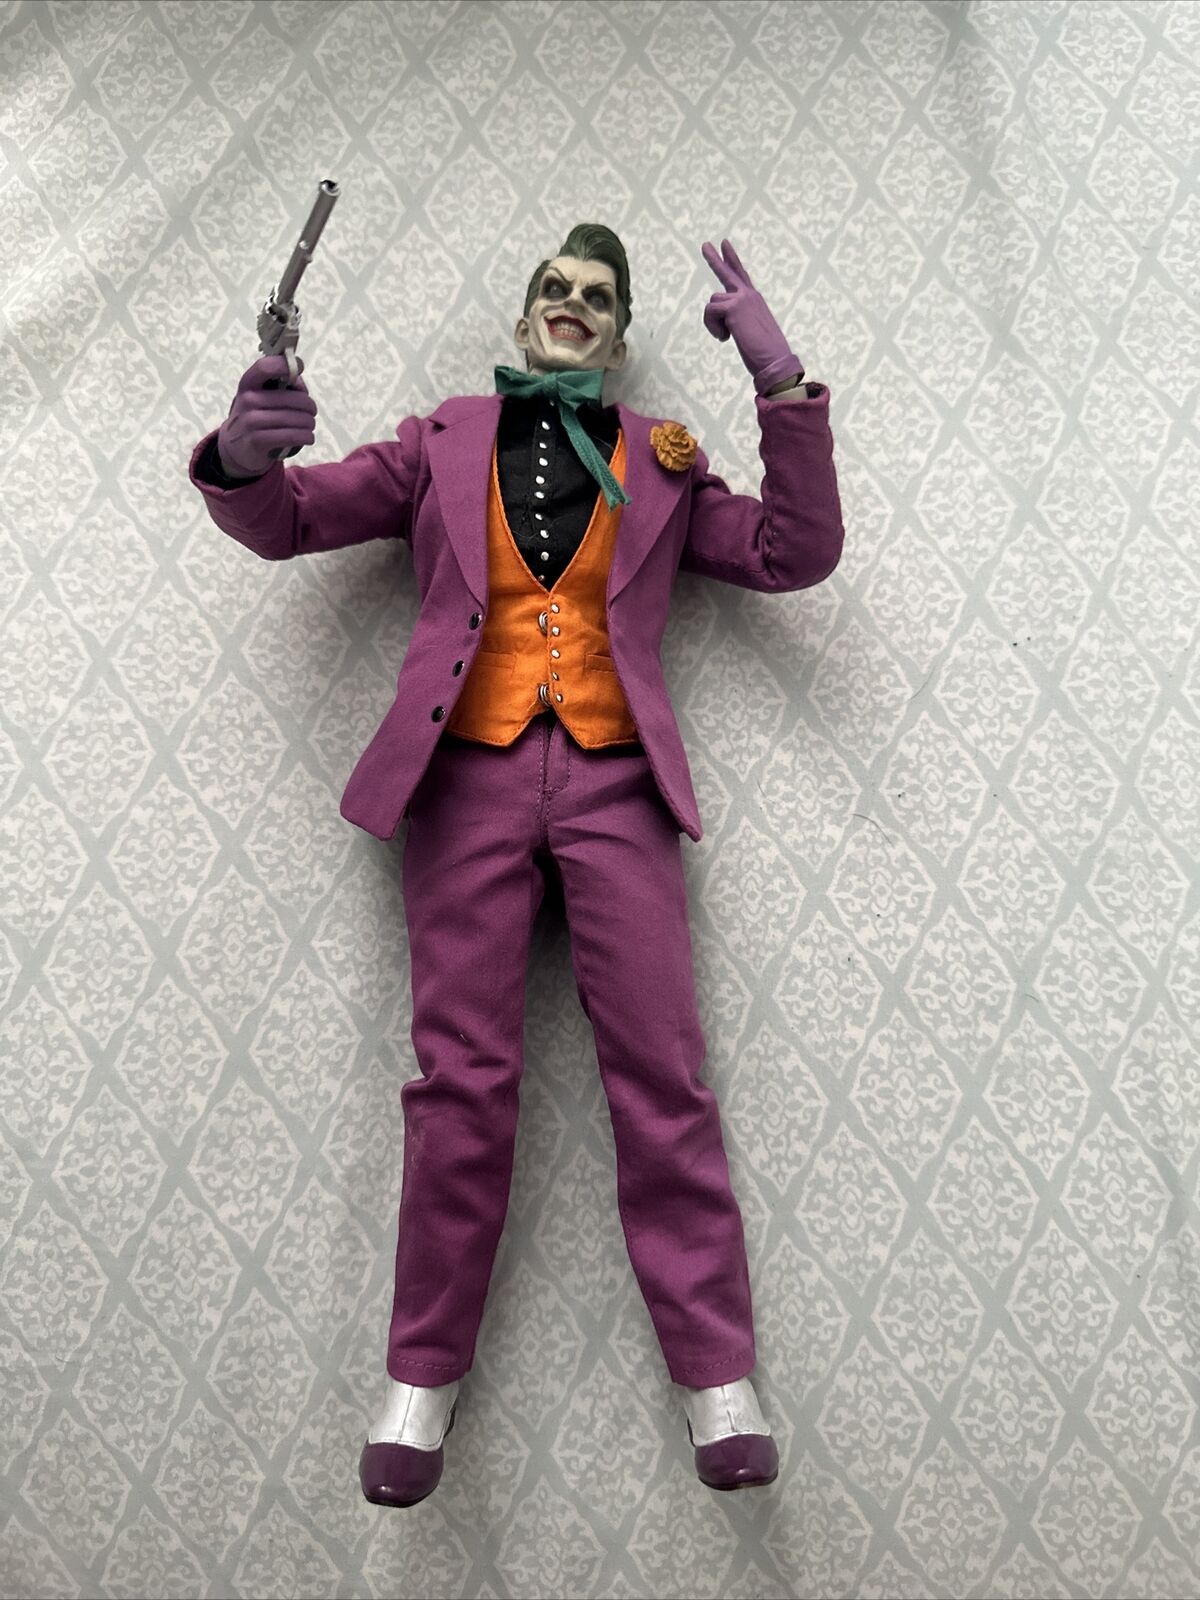 Sideshow Collectibles 100426 DC Comics The Joker 1/6 scale figure PREOWNED